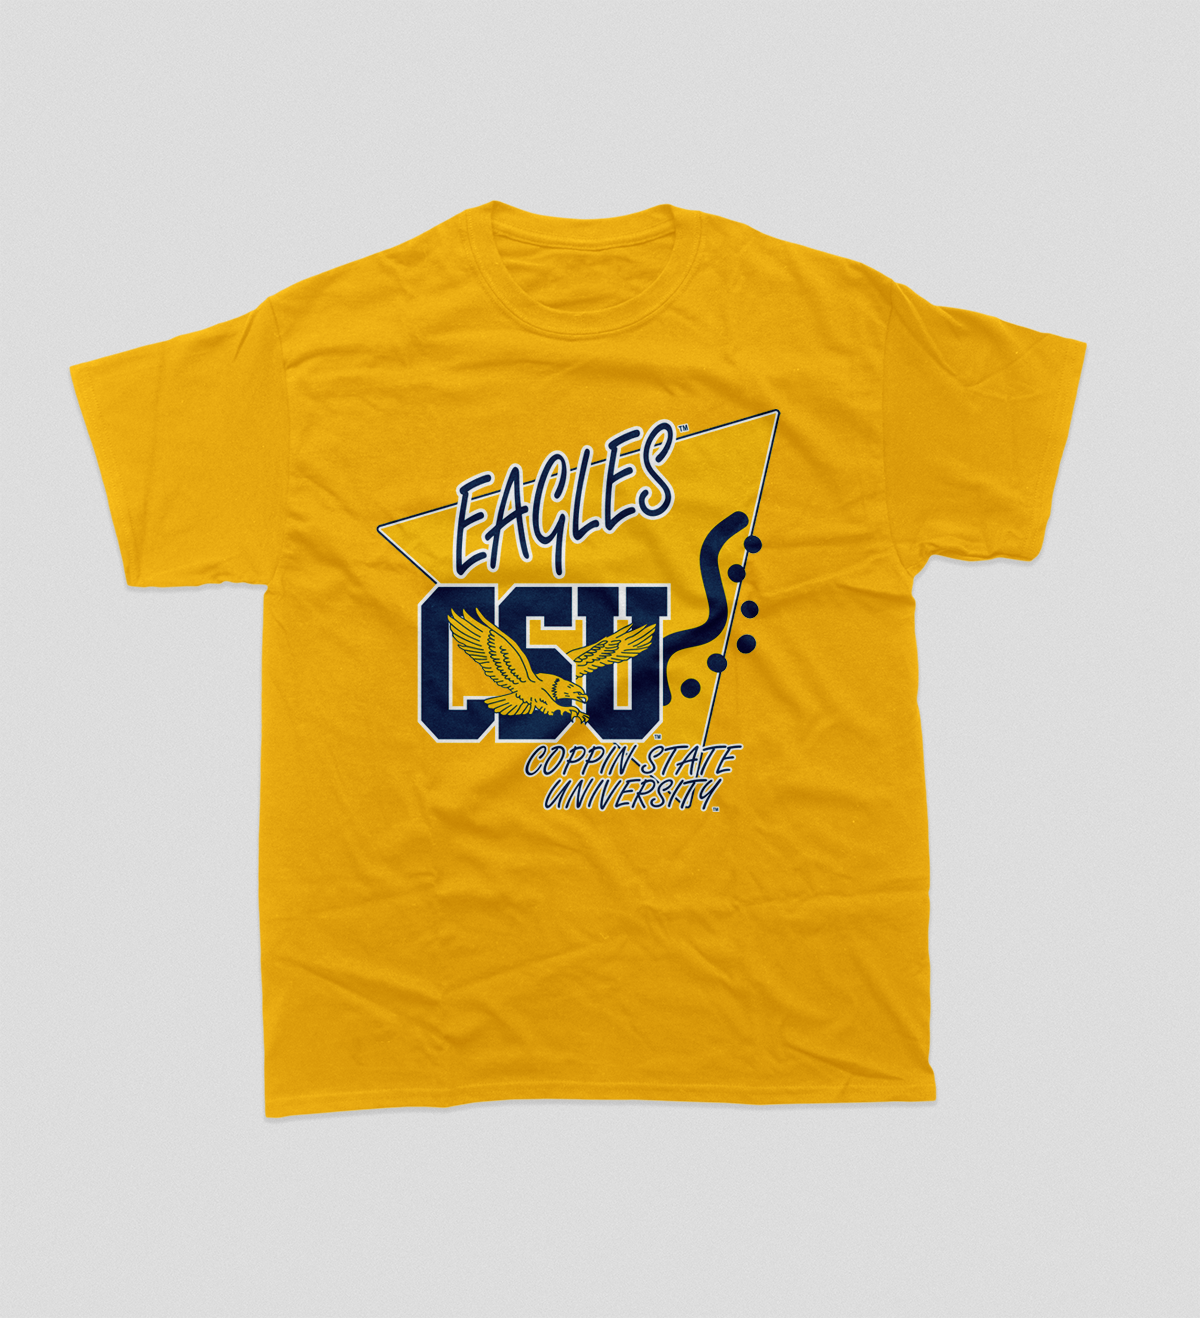 Coppin State Beeper T-shirt